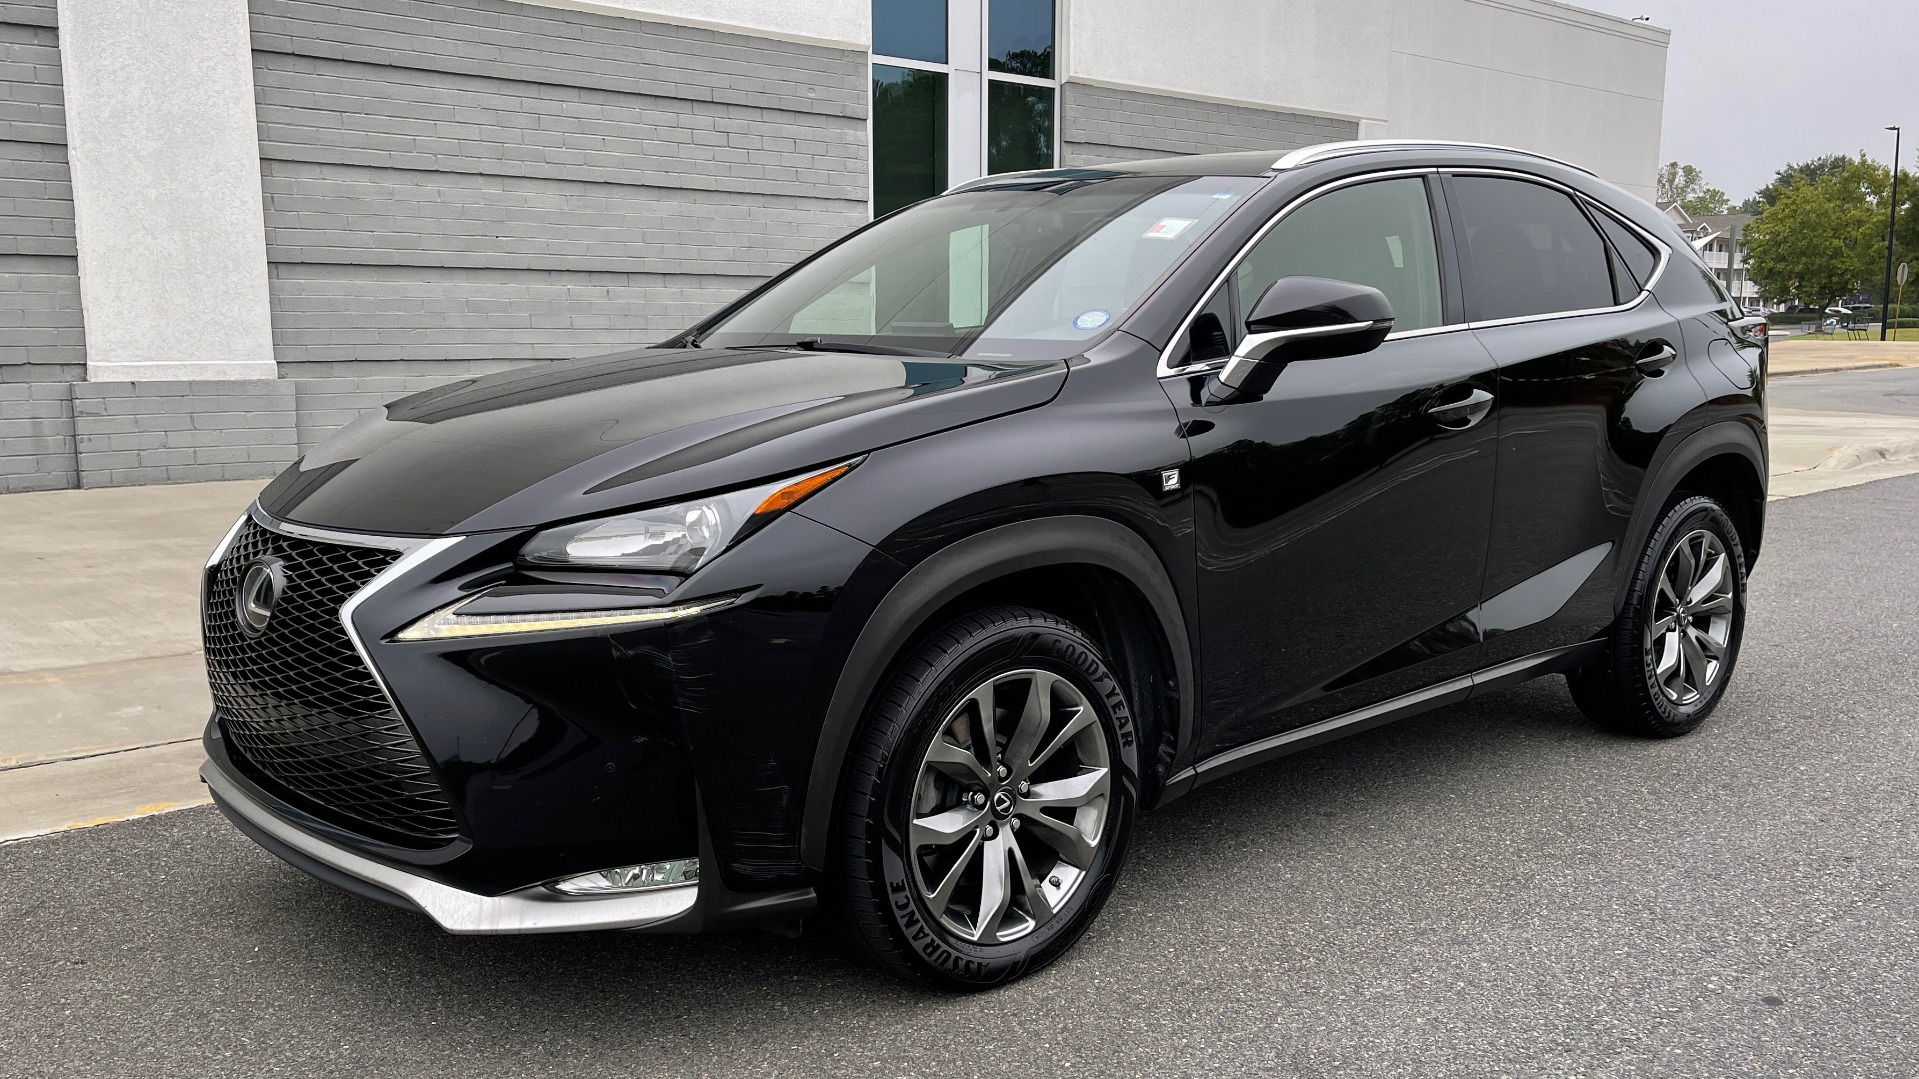 Used 2017 Lexus NX 200T PREMIUM F-SPORT / 2.0L TURBO / BSM / PARK ASST / REARVIEW for sale Sold at Formula Imports in Charlotte NC 28227 3